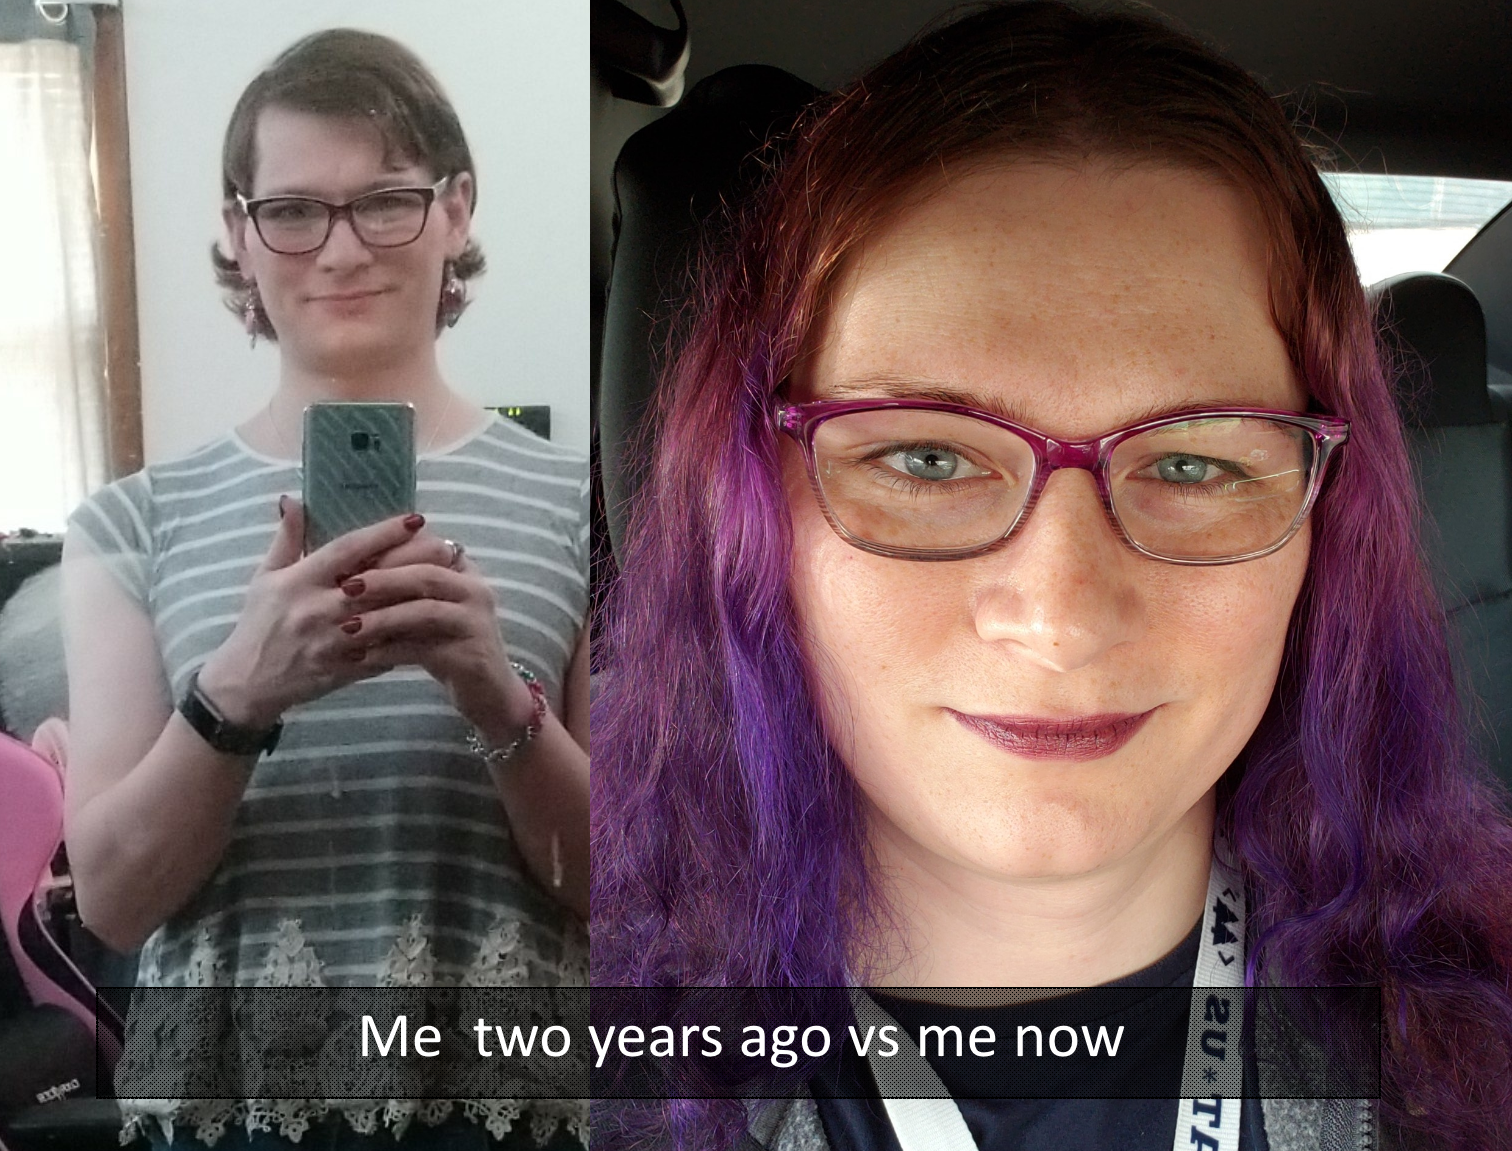 Me two years ago vs today